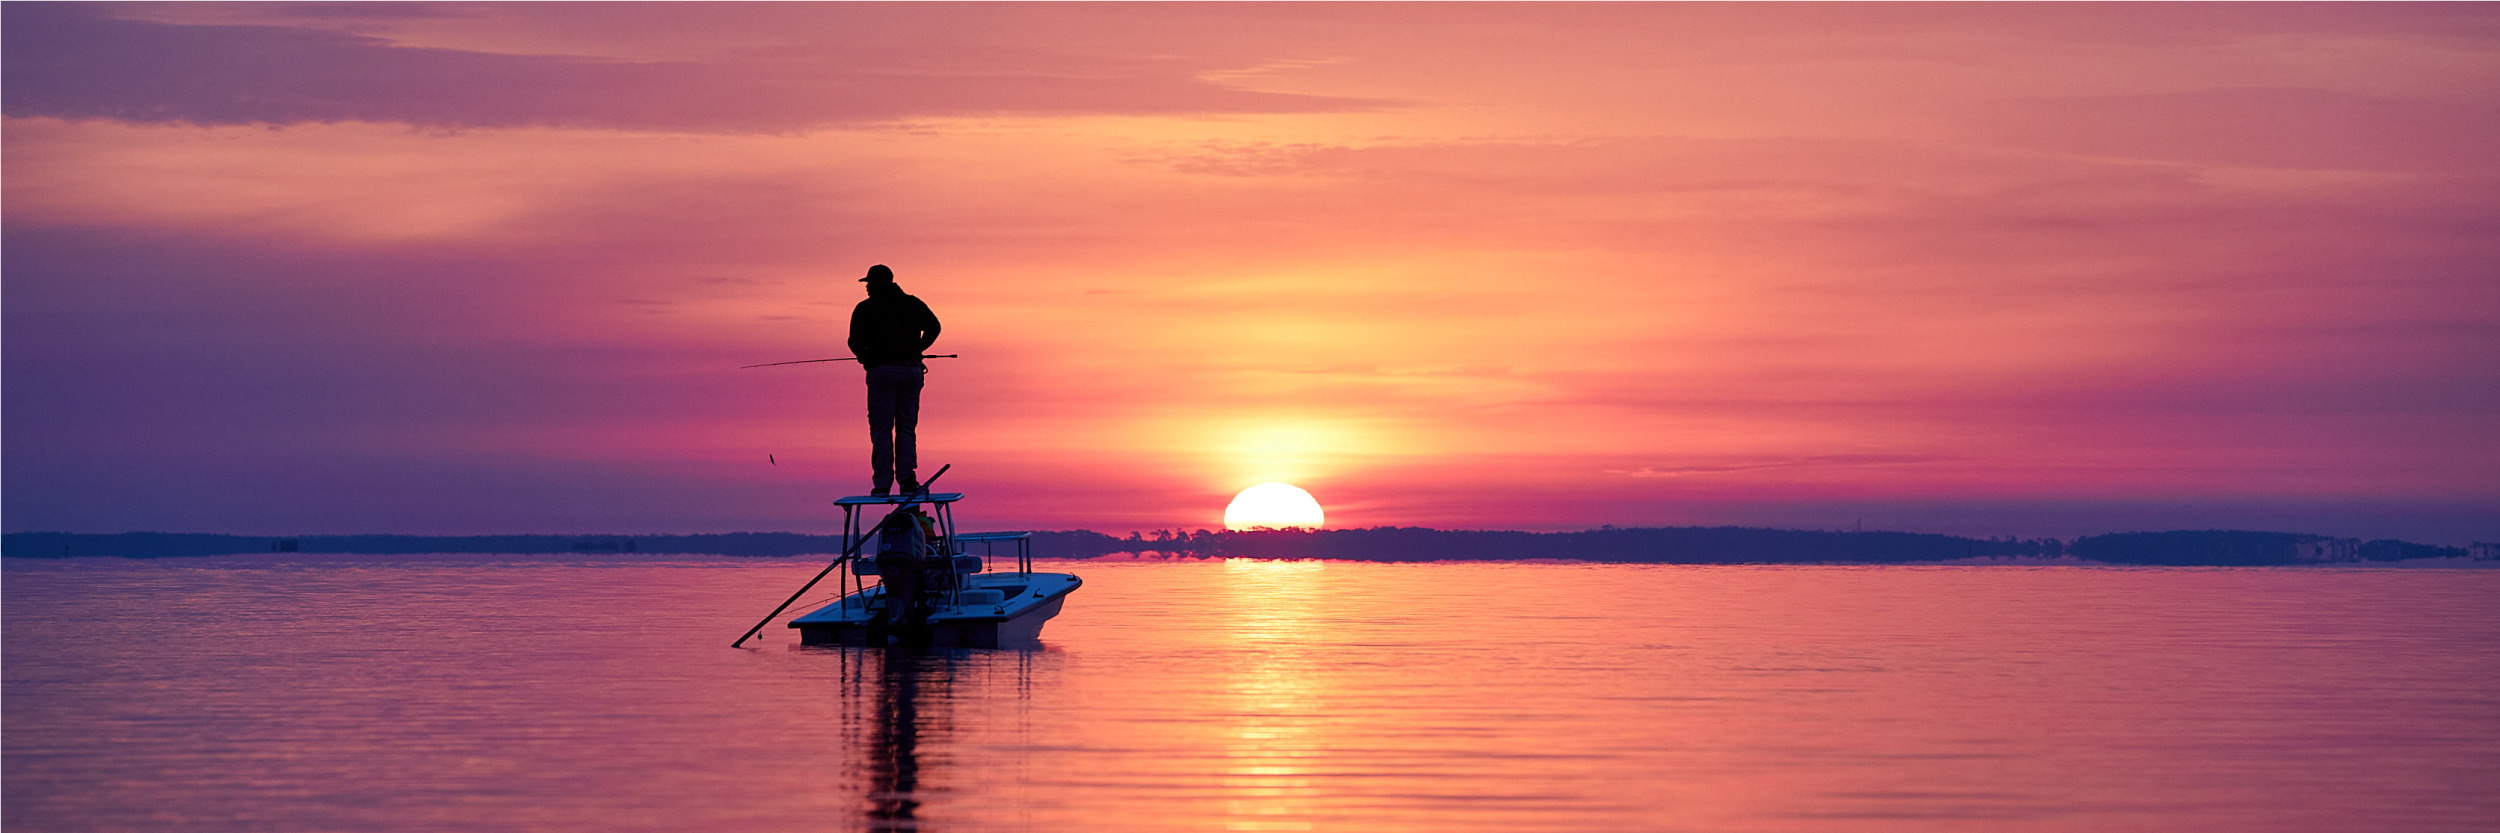 Banner image of someone fishing in Florida